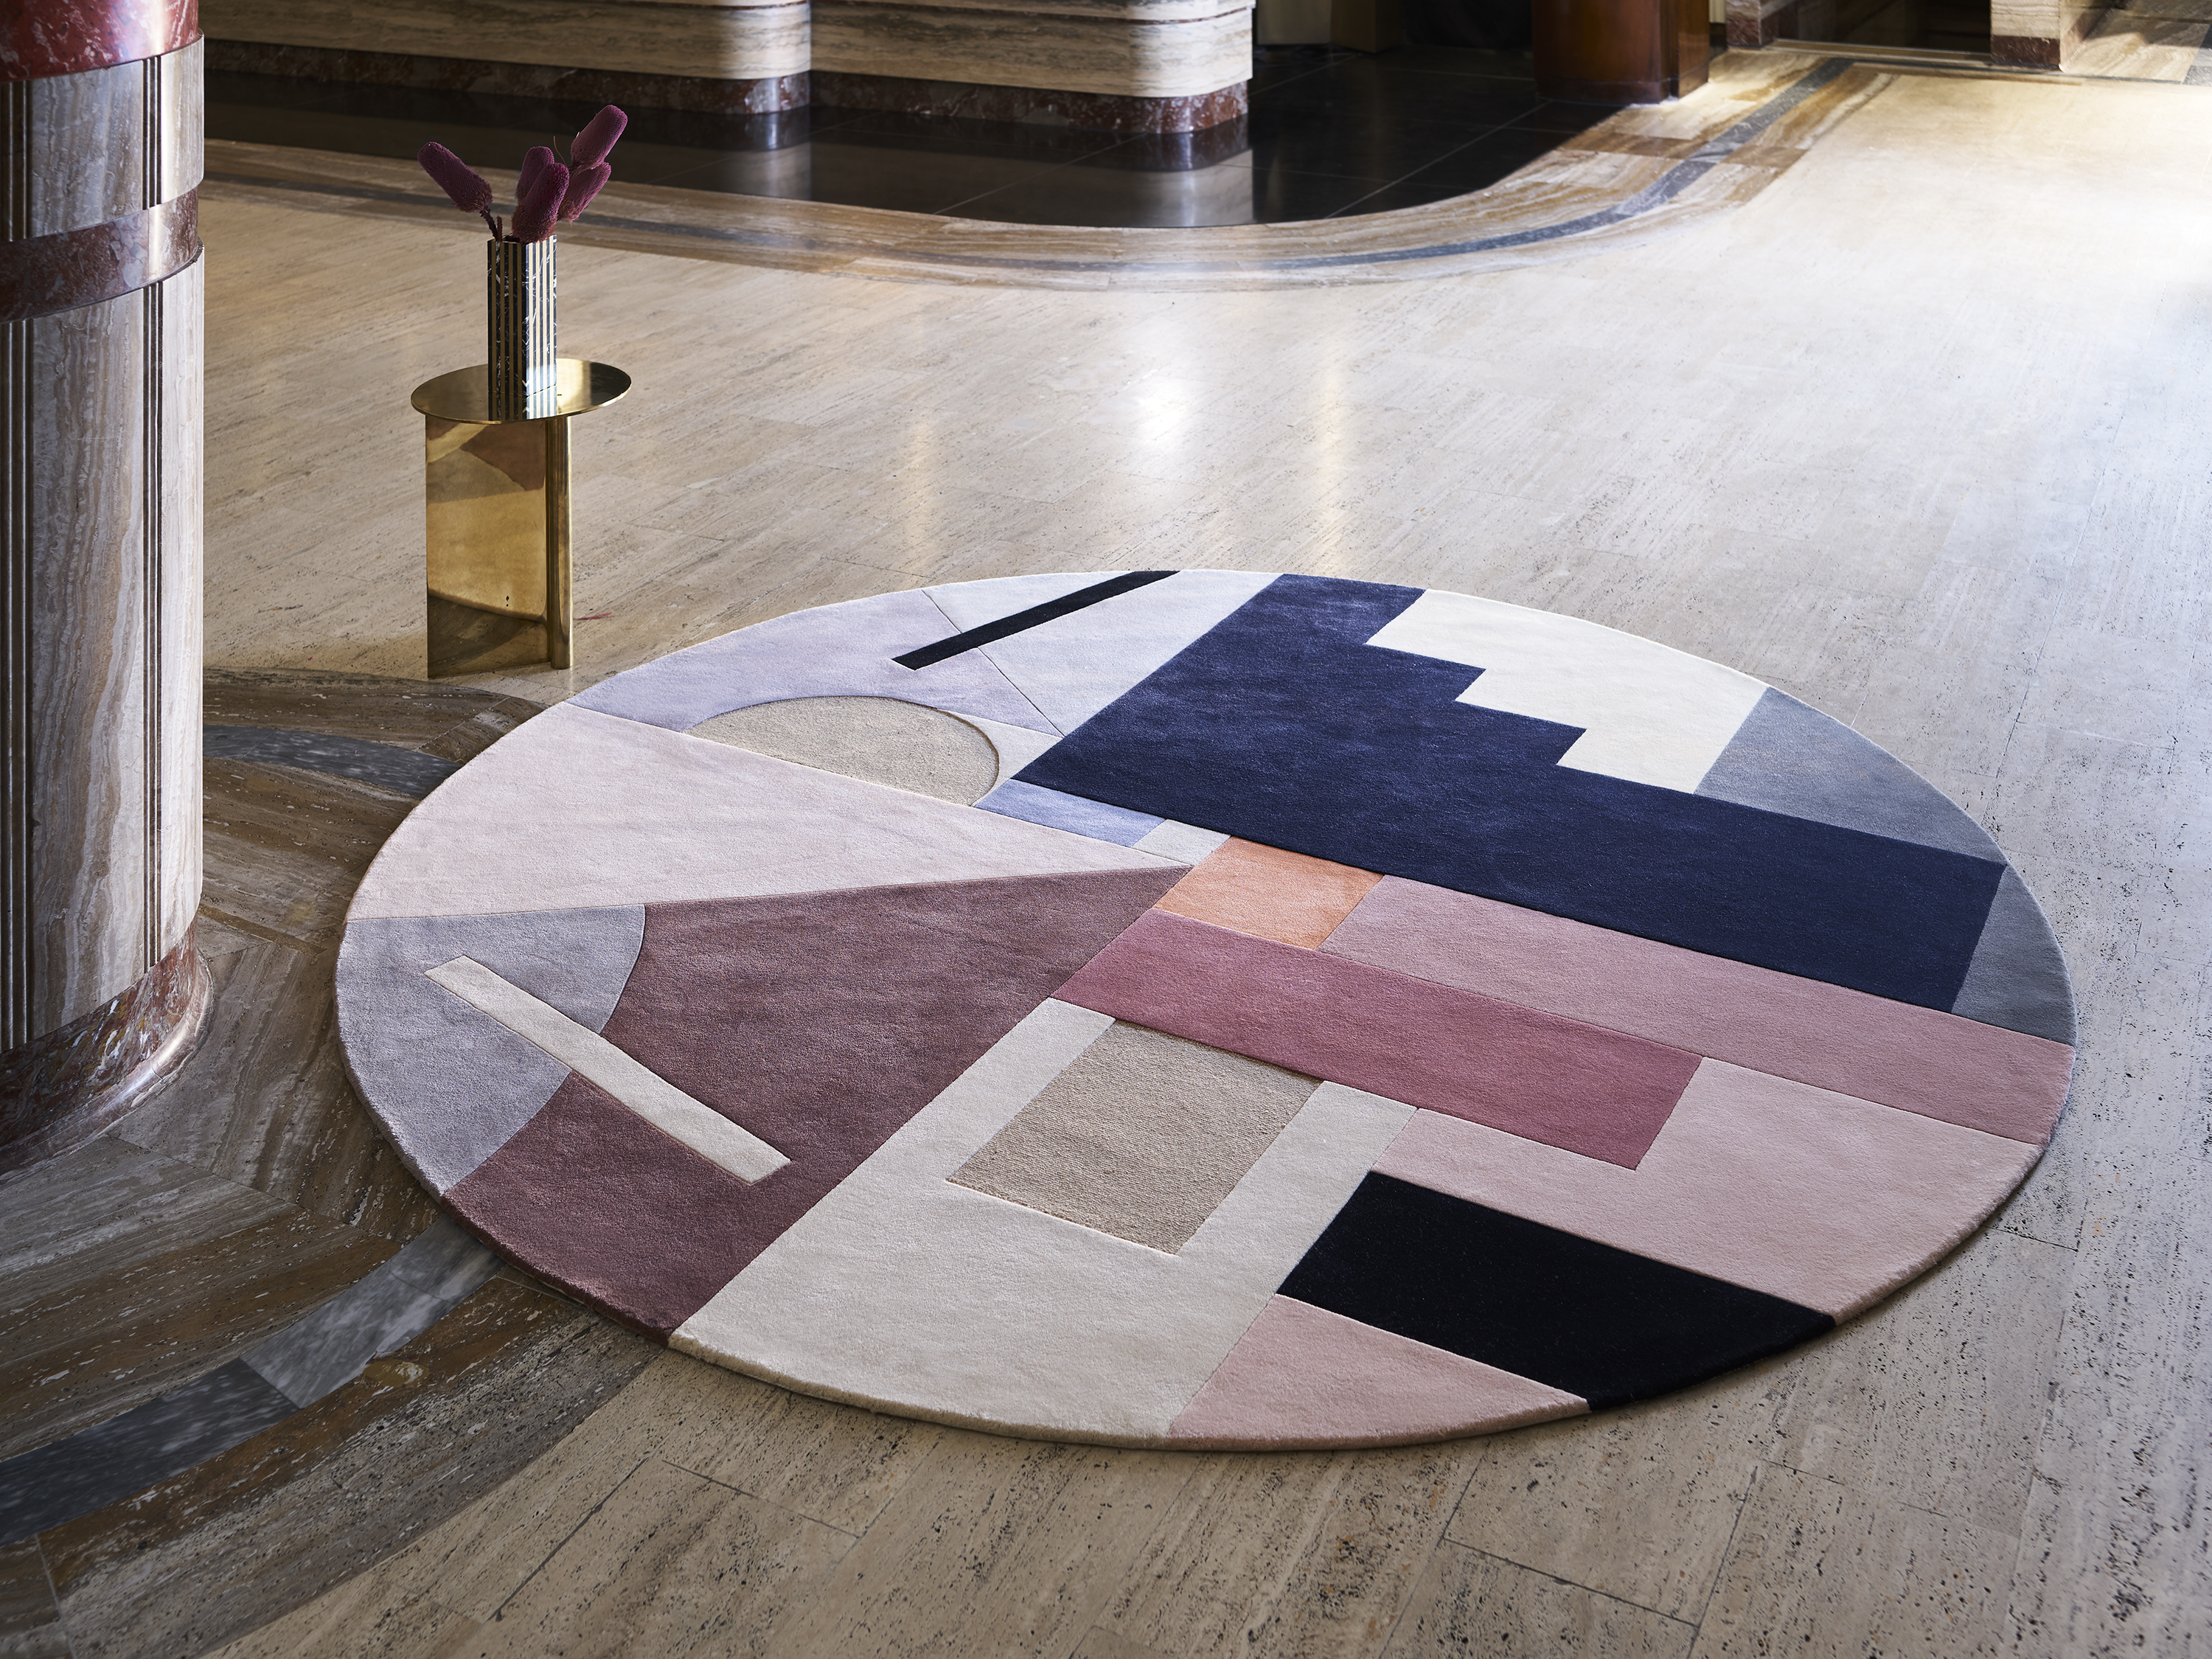 Designer Rugs - Our CENTRAL PARK rug by @gregnatale adds a